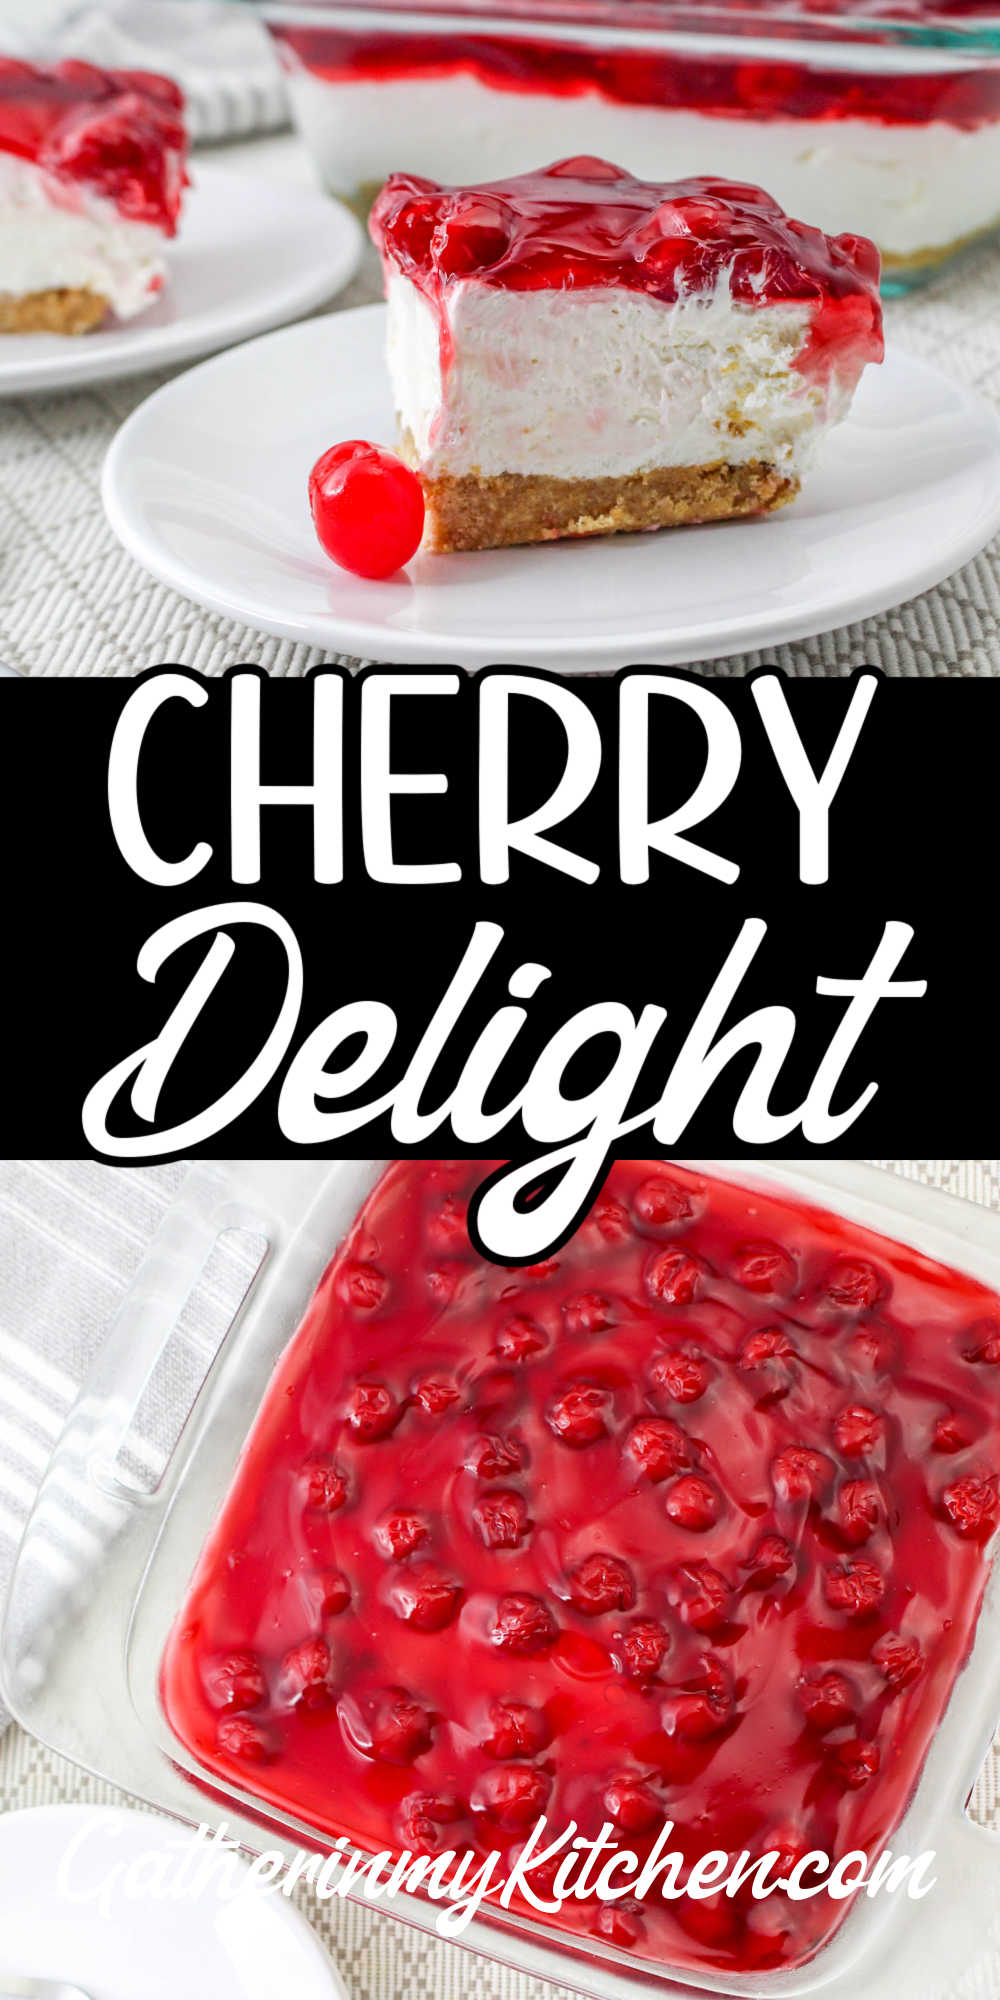 Pin image: top has piece of cherry delight on a plate, middle says "cherry delight" and bottom has a top down view of a 9x9 dish with cherry delight.